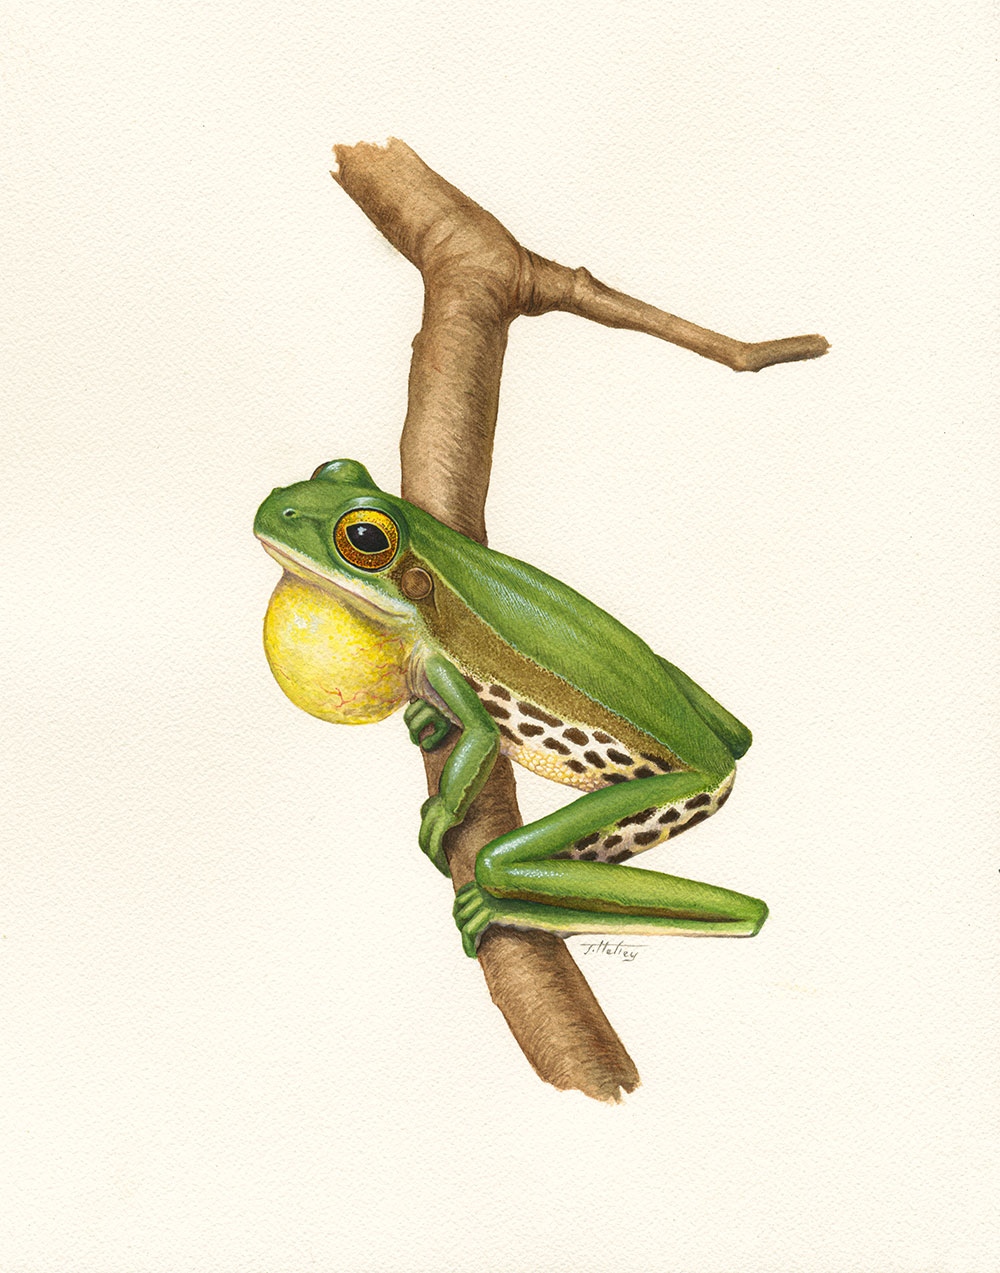 The Campo Grande Tree Frog (Boana cymbalum) was last observed in 1963 in the State of São Paulo. It is one of two species of frogs formally declared to be extinct in Brazil. Illustration by Jamie Hefley.